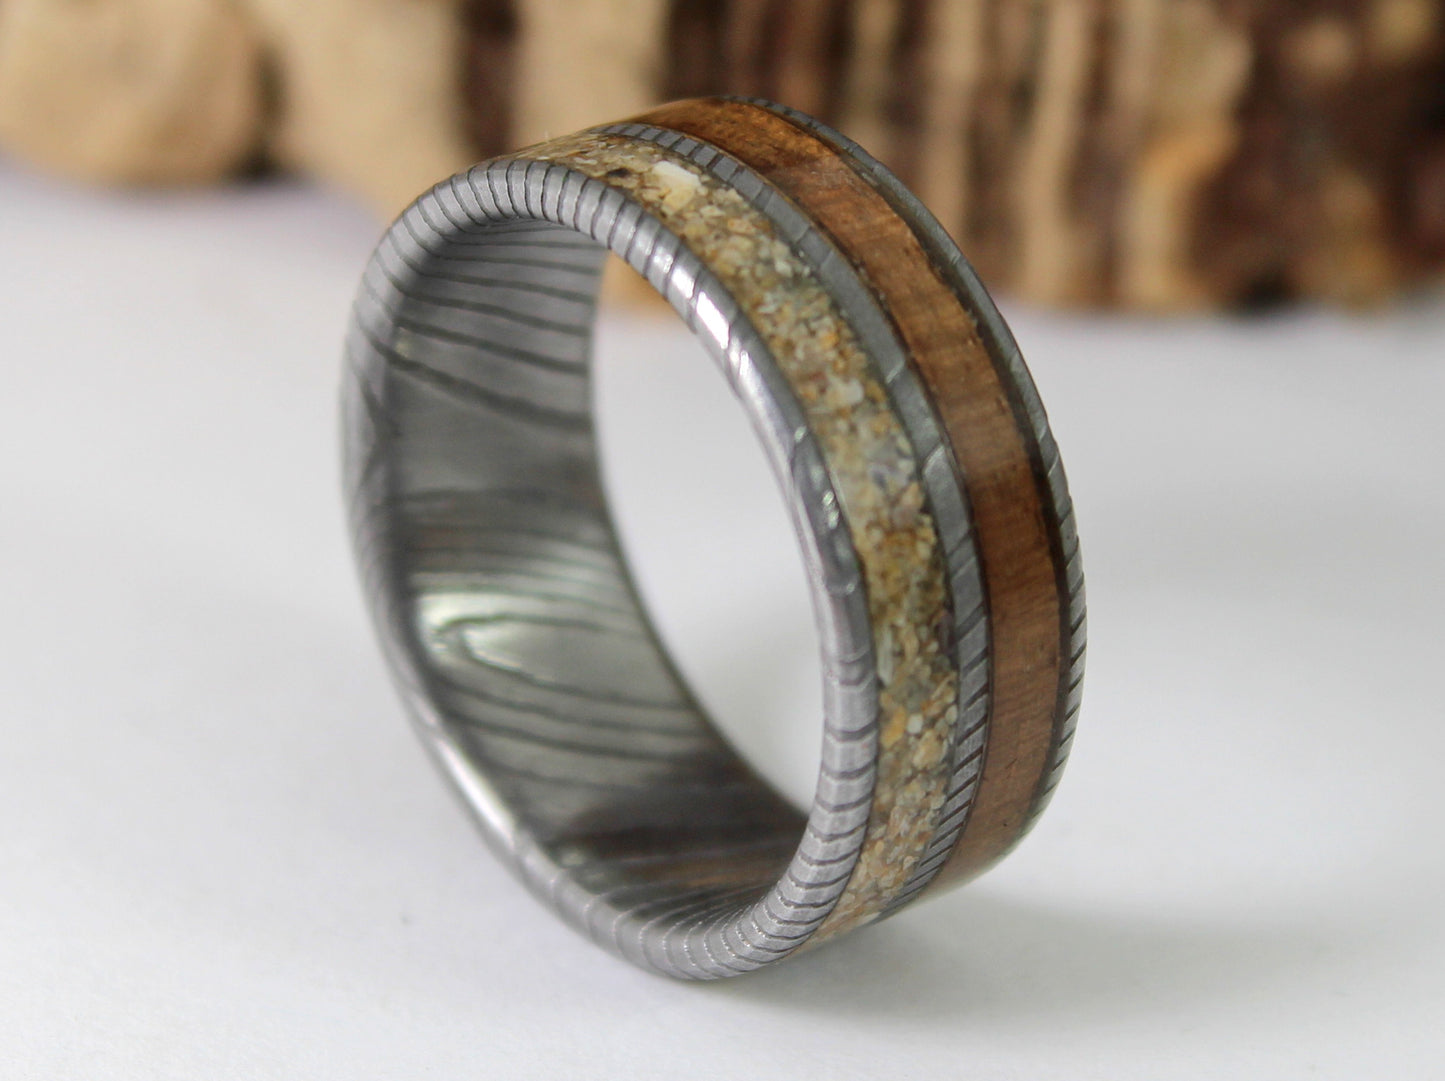 WW2 Ring: Damascus Steel, Lee Enfield Rifle Stock and Normandy Beach Sand